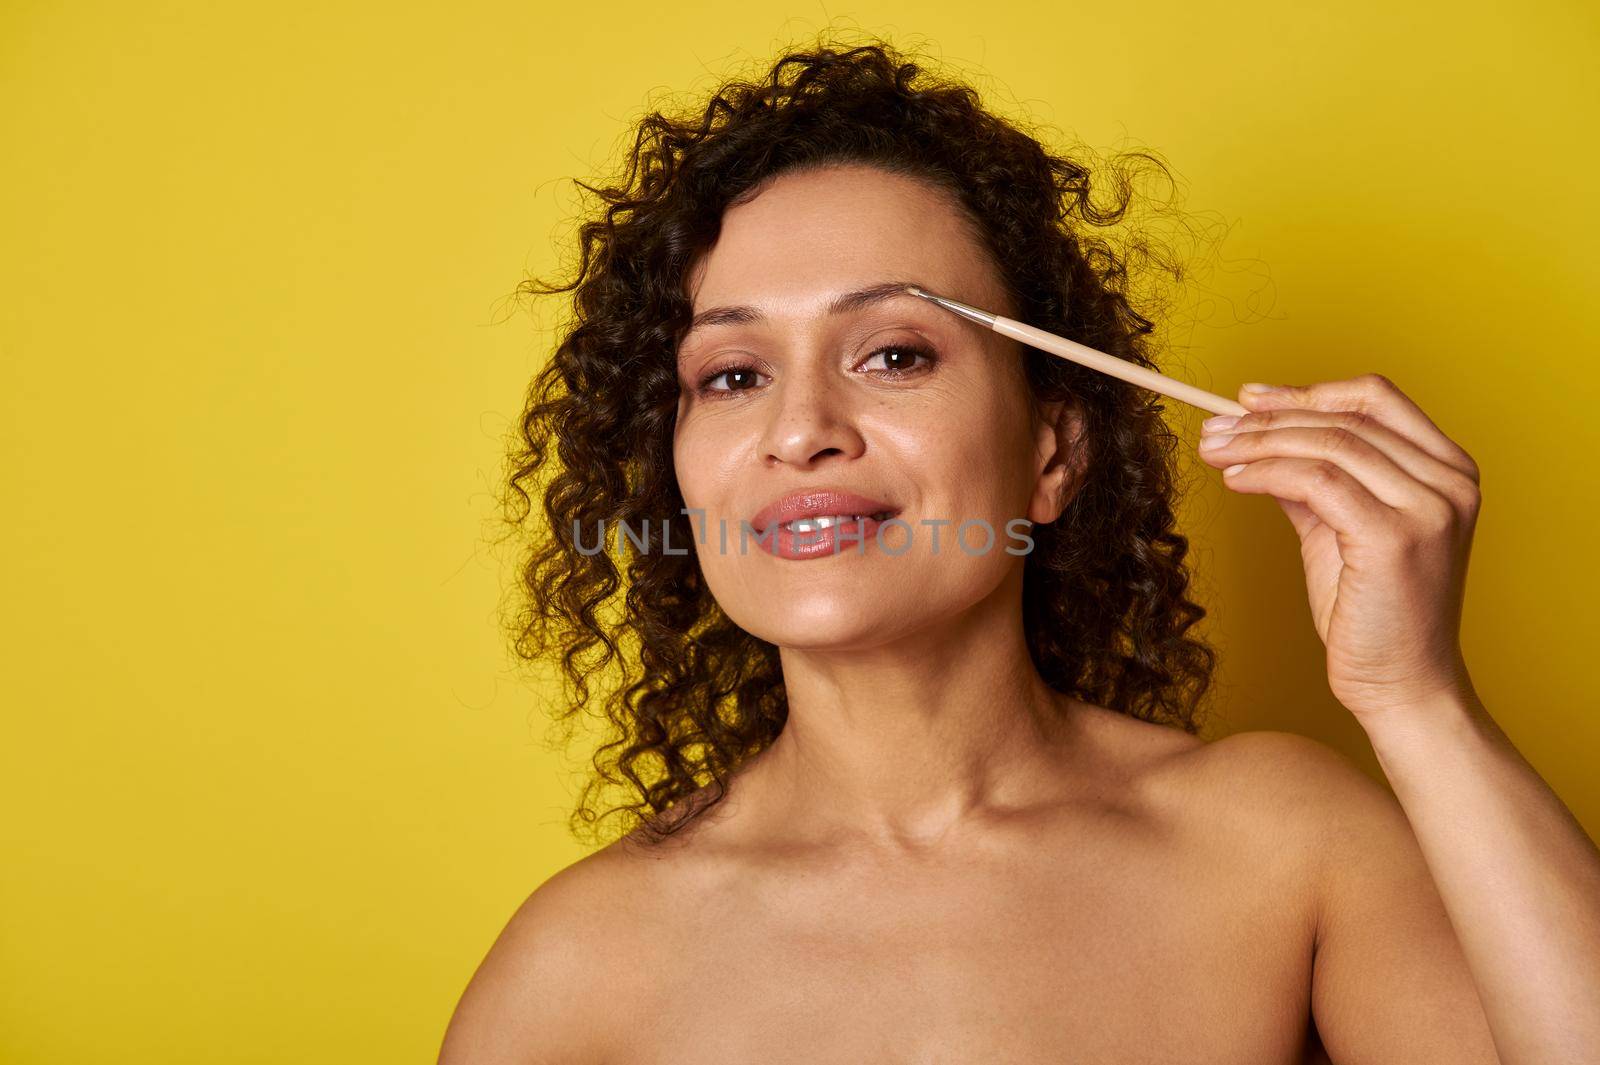 Smiling dark skin woman using makeup brush to correct and dye eyebrows. Make-up concepts on yellow background with copy space